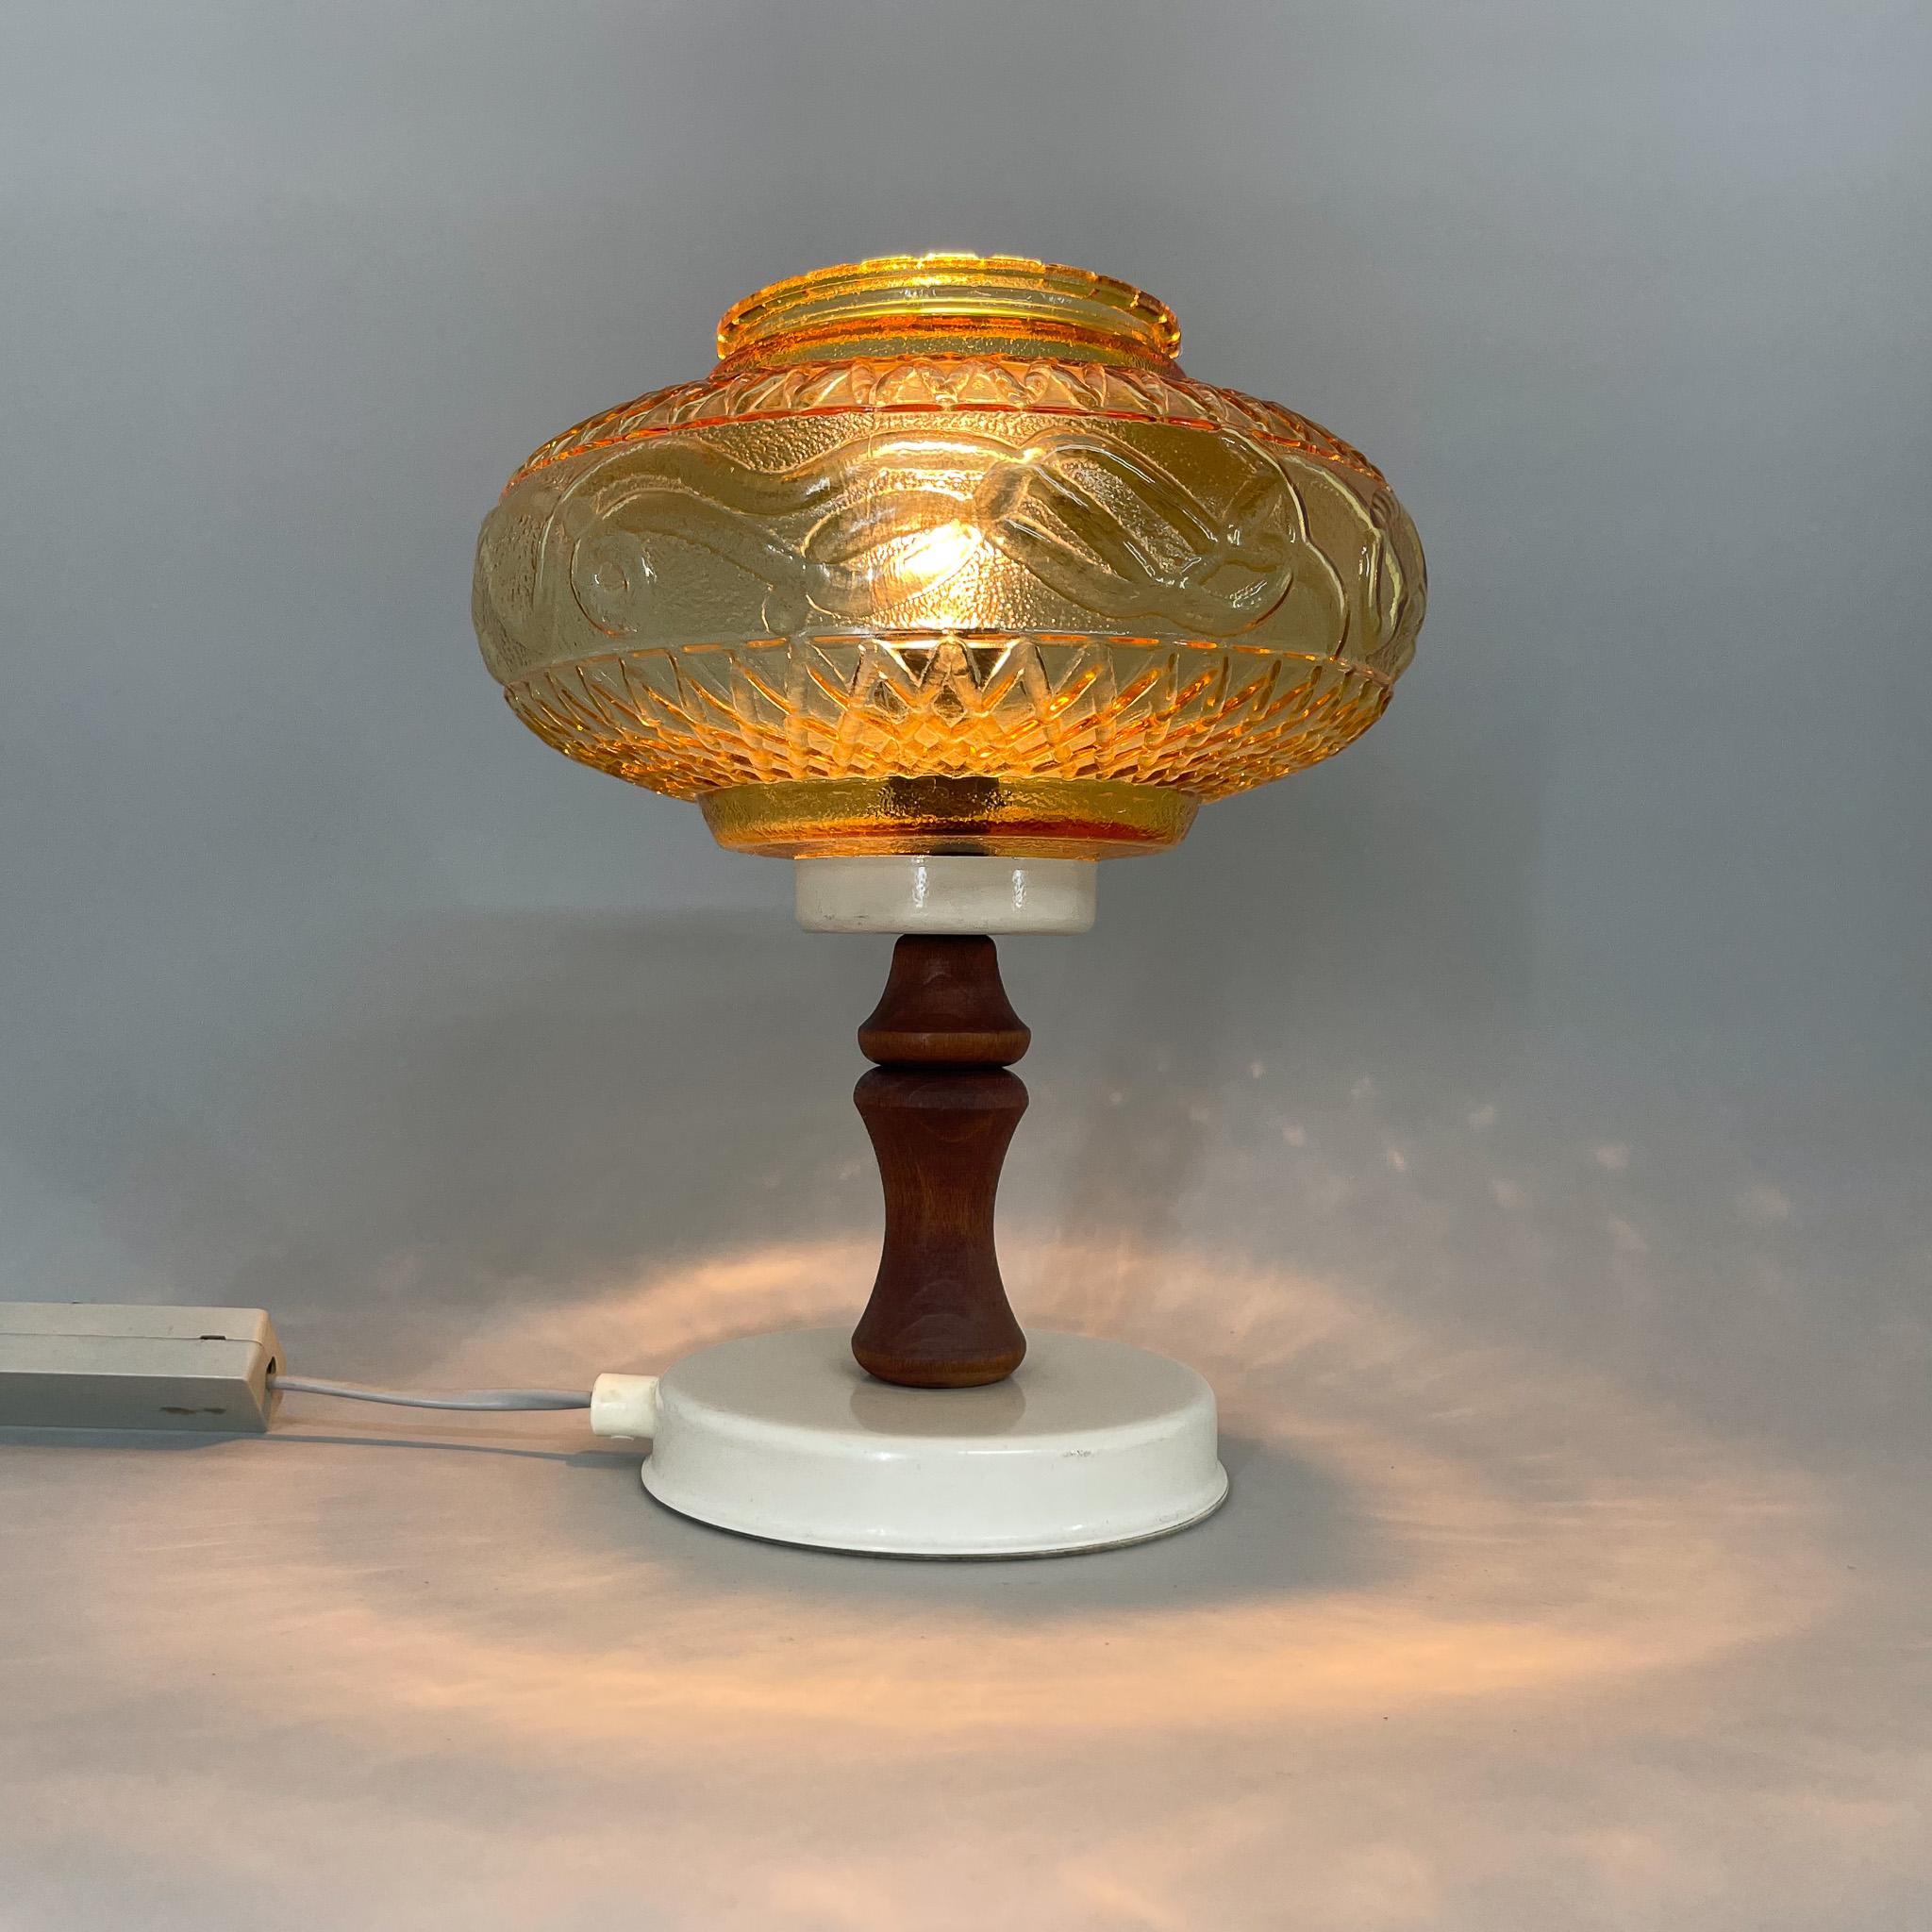 Vintage table lamp made in former Czechoslovakia in the 1970's. Bulb: E12-E14 bulb.